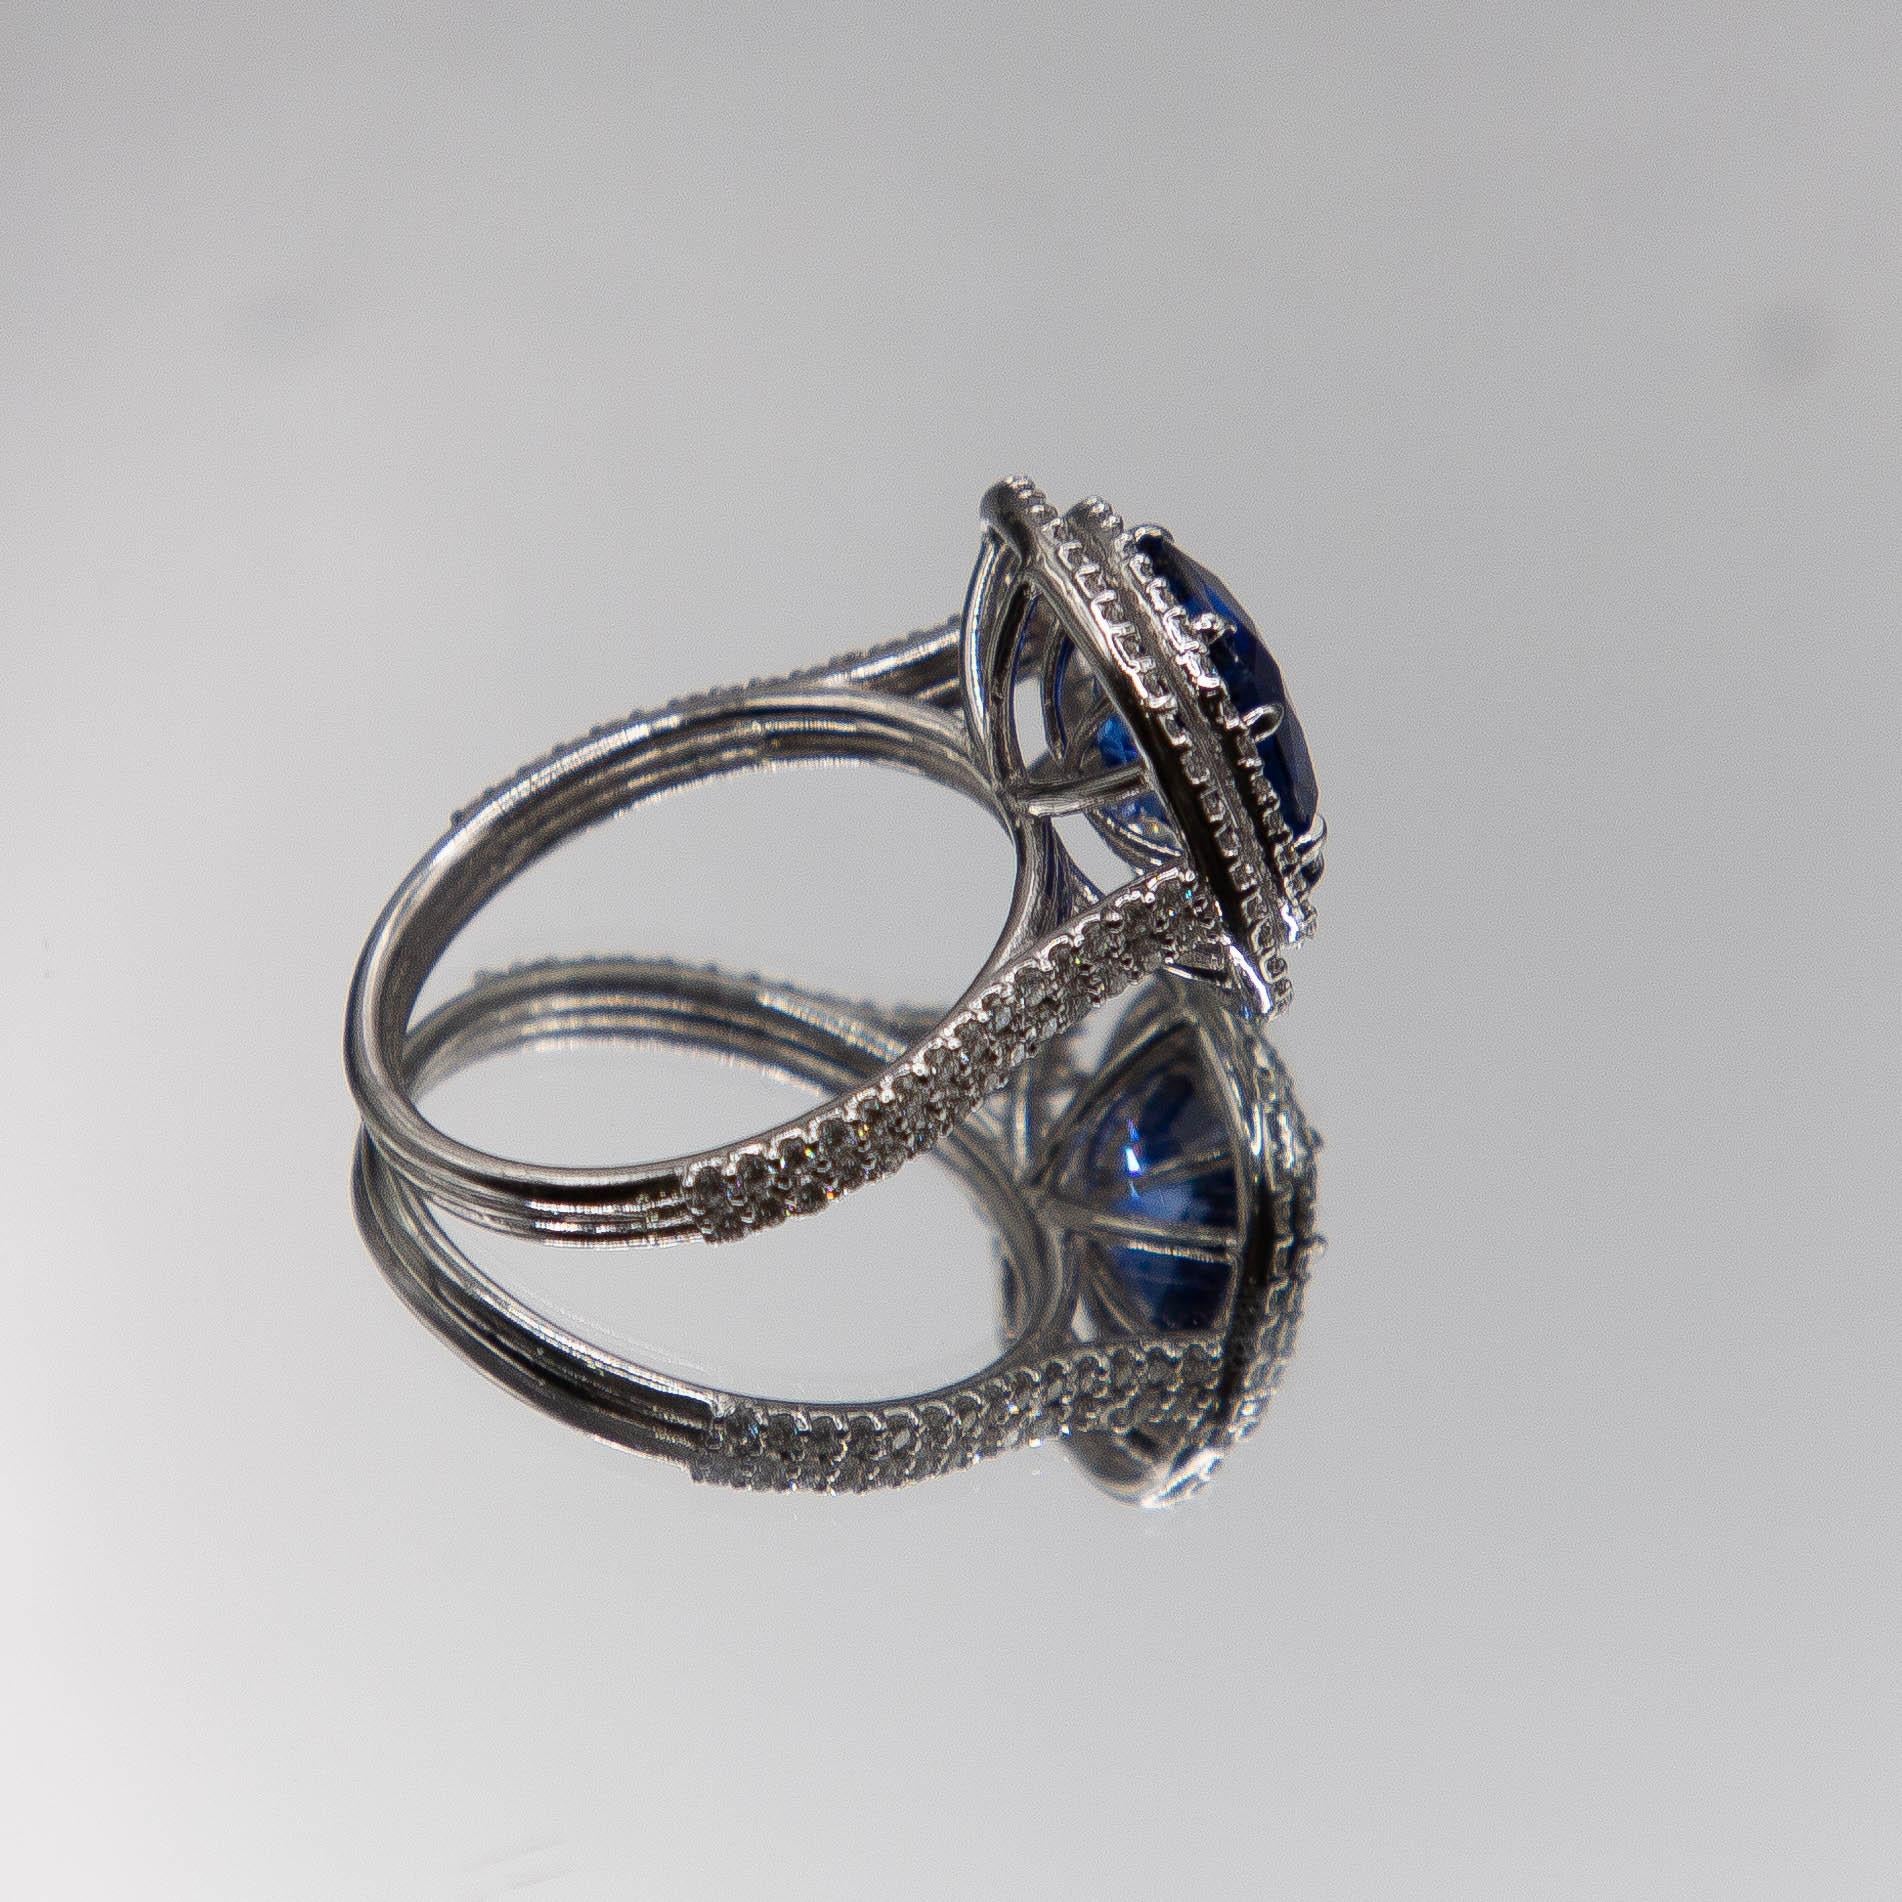 18k White Gold Halo/ Intense Blue Sapphire 6.39 Carats/ 132 Diamonds 0.66 Cts For Sale 1